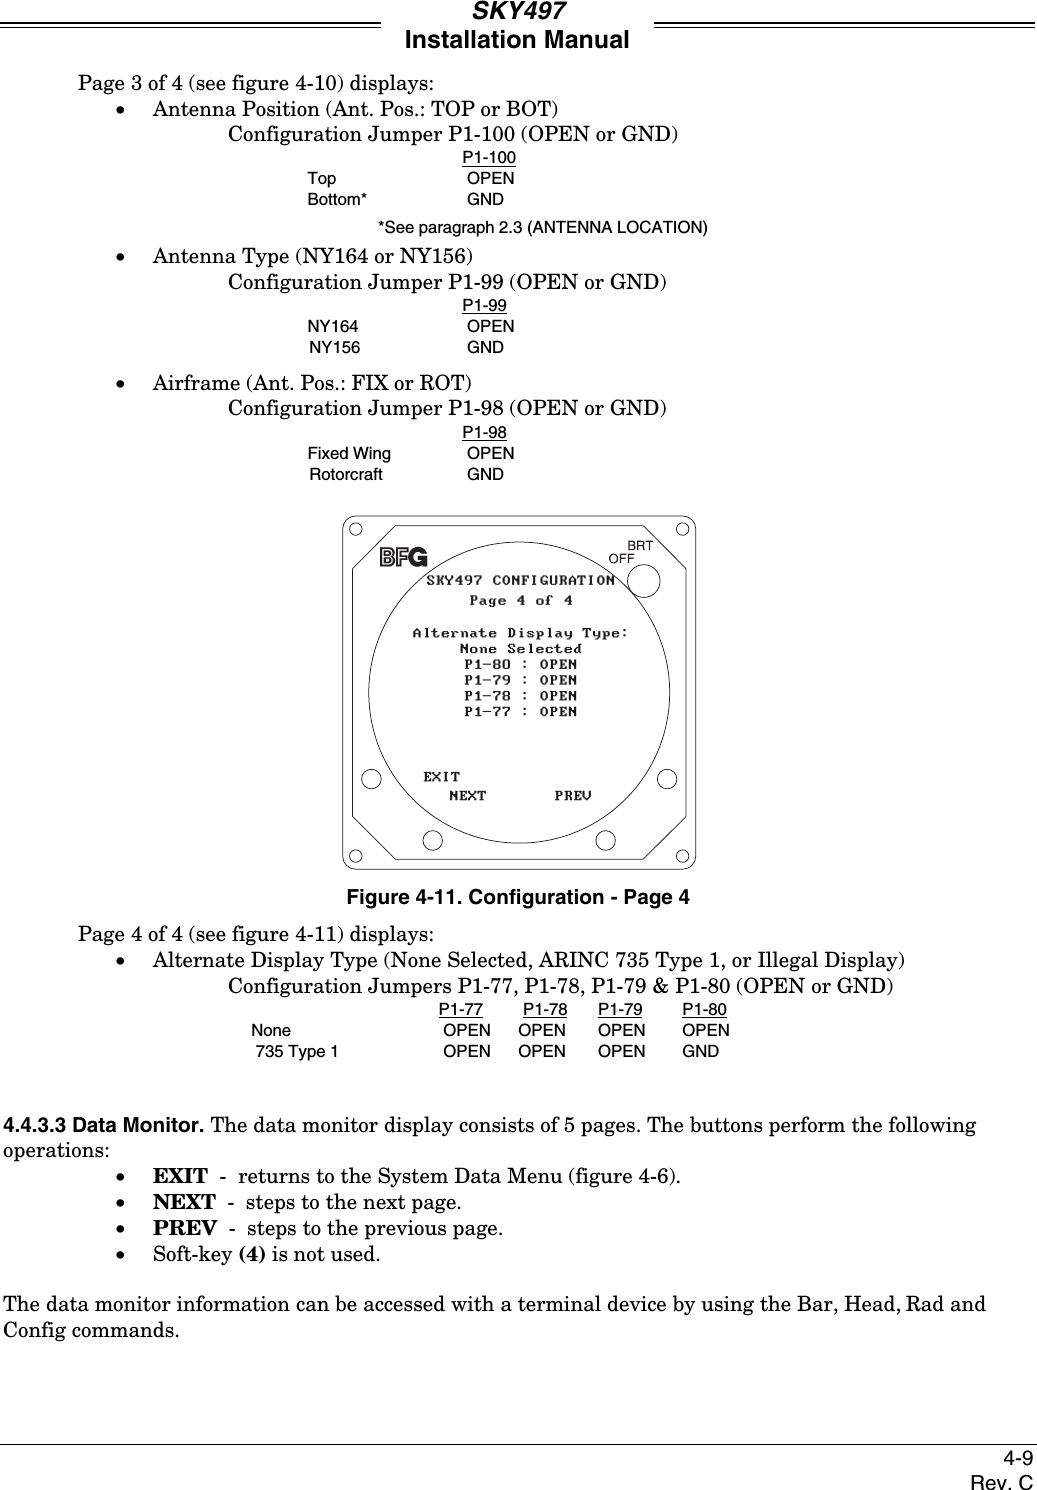 SKY497Installation Manual4-9Rev. CPage 3 of 4 (see figure 4-10) displays:• Antenna Position (Ant. Pos.: TOP or BOT)Configuration Jumper P1-100 (OPEN or GND)P1-100Top OPENBottom* GND*See paragraph 2.3 (ANTENNA LOCATION)• Antenna Type (NY164 or NY156)Configuration Jumper P1-99 (OPEN or GND)P1-99NY164 OPENNY156 GND• Airframe (Ant. Pos.: FIX or ROT)Configuration Jumper P1-98 (OPEN or GND)P1-98Fixed Wing OPENRotorcraft GNDFigure 4-11. Configuration - Page 4Page 4 of 4 (see figure 4-11) displays:• Alternate Display Type (None Selected, ARINC 735 Type 1, or Illegal Display)Configuration Jumpers P1-77, P1-78, P1-79 &amp; P1-80 (OPEN or GND)P1-77 P1-78 P1-79 P1-80None OPEN OPEN OPEN OPEN 735 Type 1 OPEN OPEN  OPEN GND4.4.3.3 Data Monitor. The data monitor display consists of 5 pages. The buttons perform the followingoperations:• EXIT  -  returns to the System Data Menu (figure 4-6).• NEXT  -  steps to the next page.• PREV  -  steps to the previous page.• Soft-key (4) is not used.The data monitor information can be accessed with a terminal device by using the Bar, Head, Rad andConfig commands.